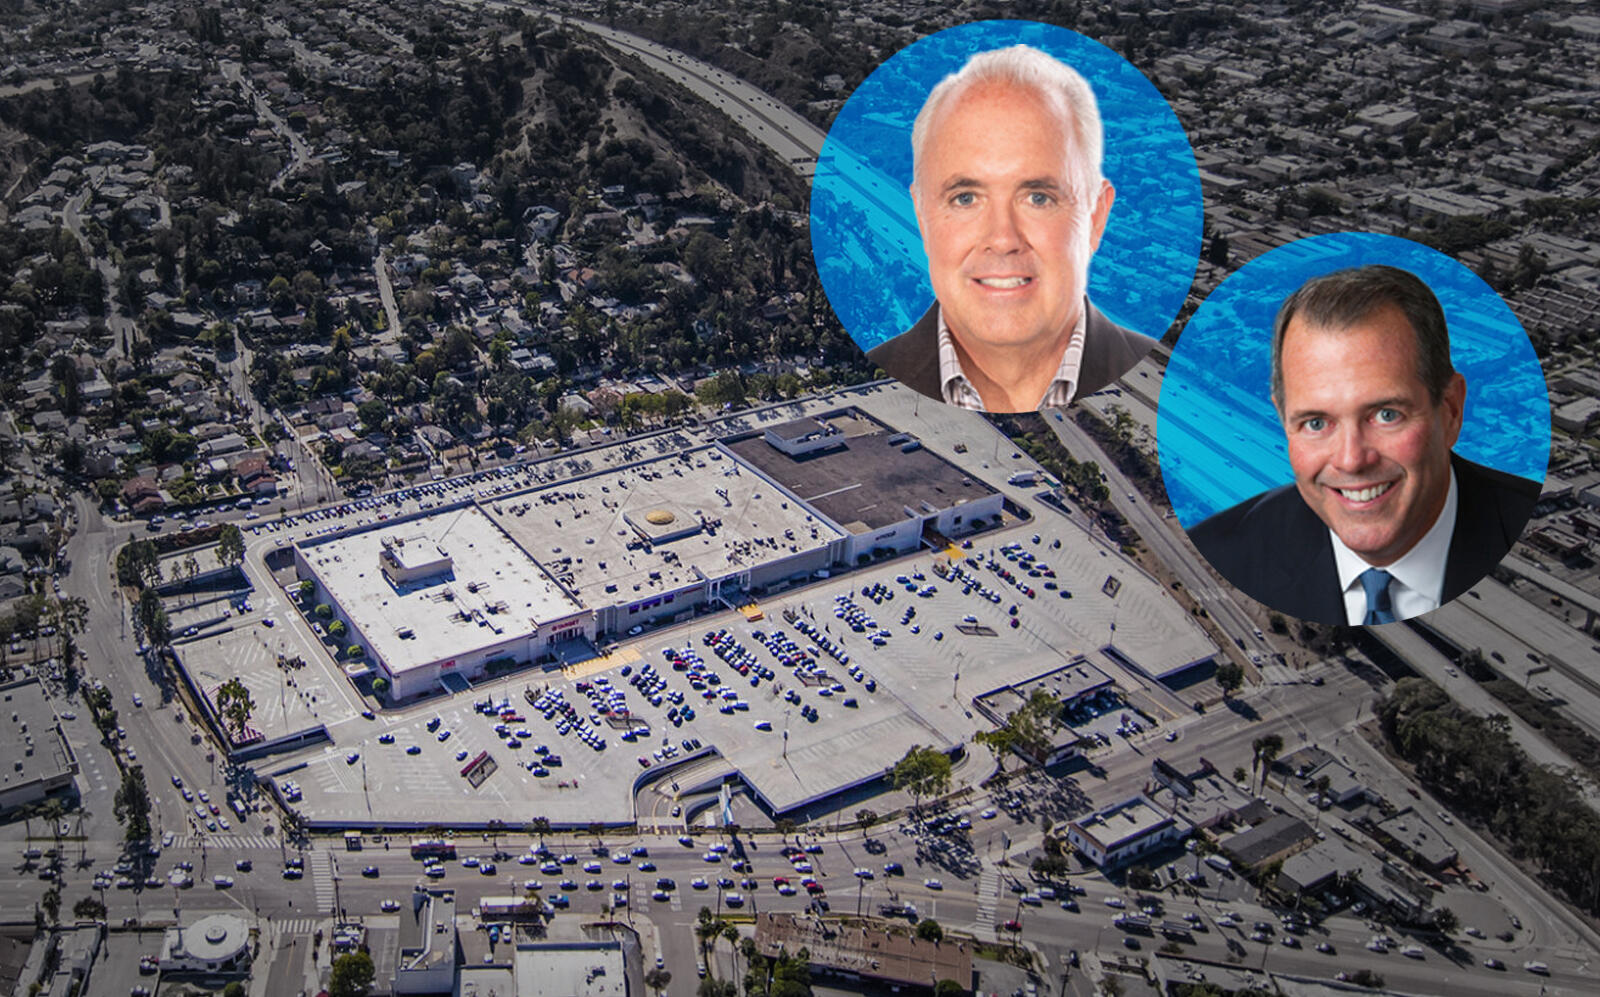 Eastern Real Estate — led by Brian Kelly and Daniel Doherty, above — and Atlas Capital Group acquired Eagle Rock Plaza (Eastern Real Estate)